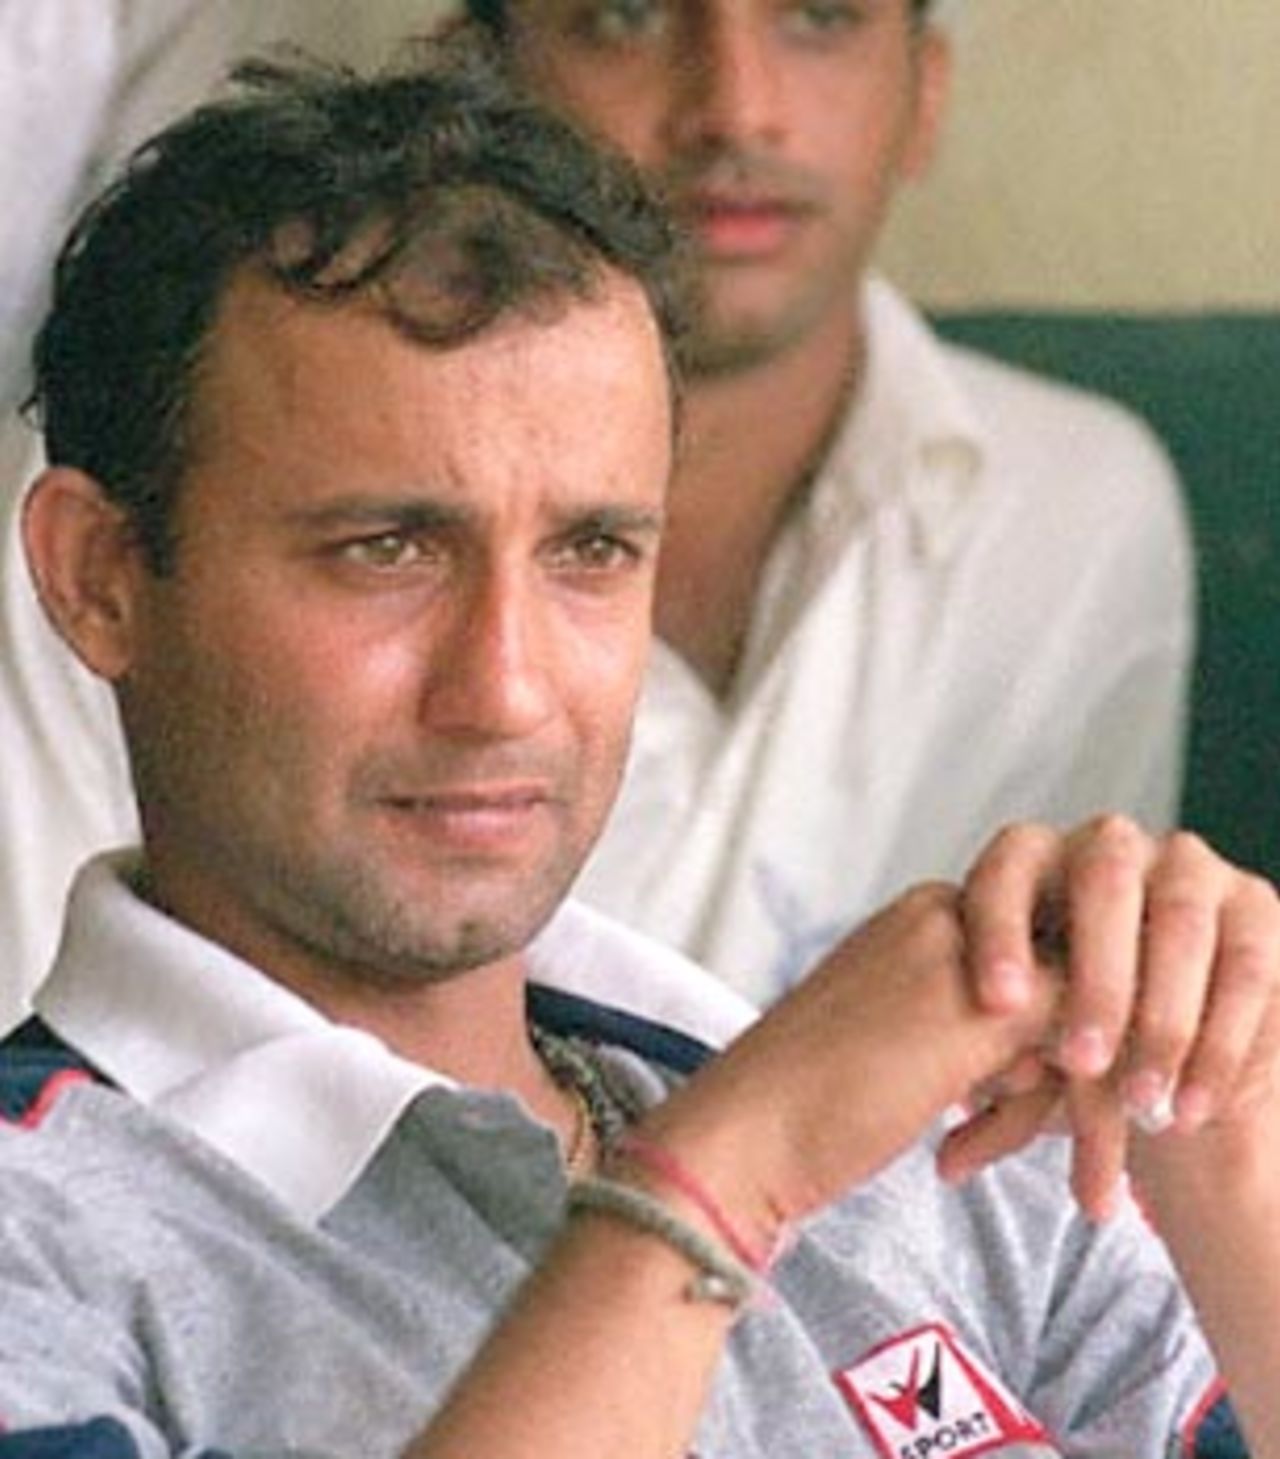 Former Indian wicketkeeper Nayan Mongia watches a local cricket match from the dressing room at a Bombay stadium 01 November 2000. A report on match fixing in cricket compiled by India's Central Bureau of Investigation (CBI) and made public 01 November, has alleged that Mongia was involved in rigging matches for cash.